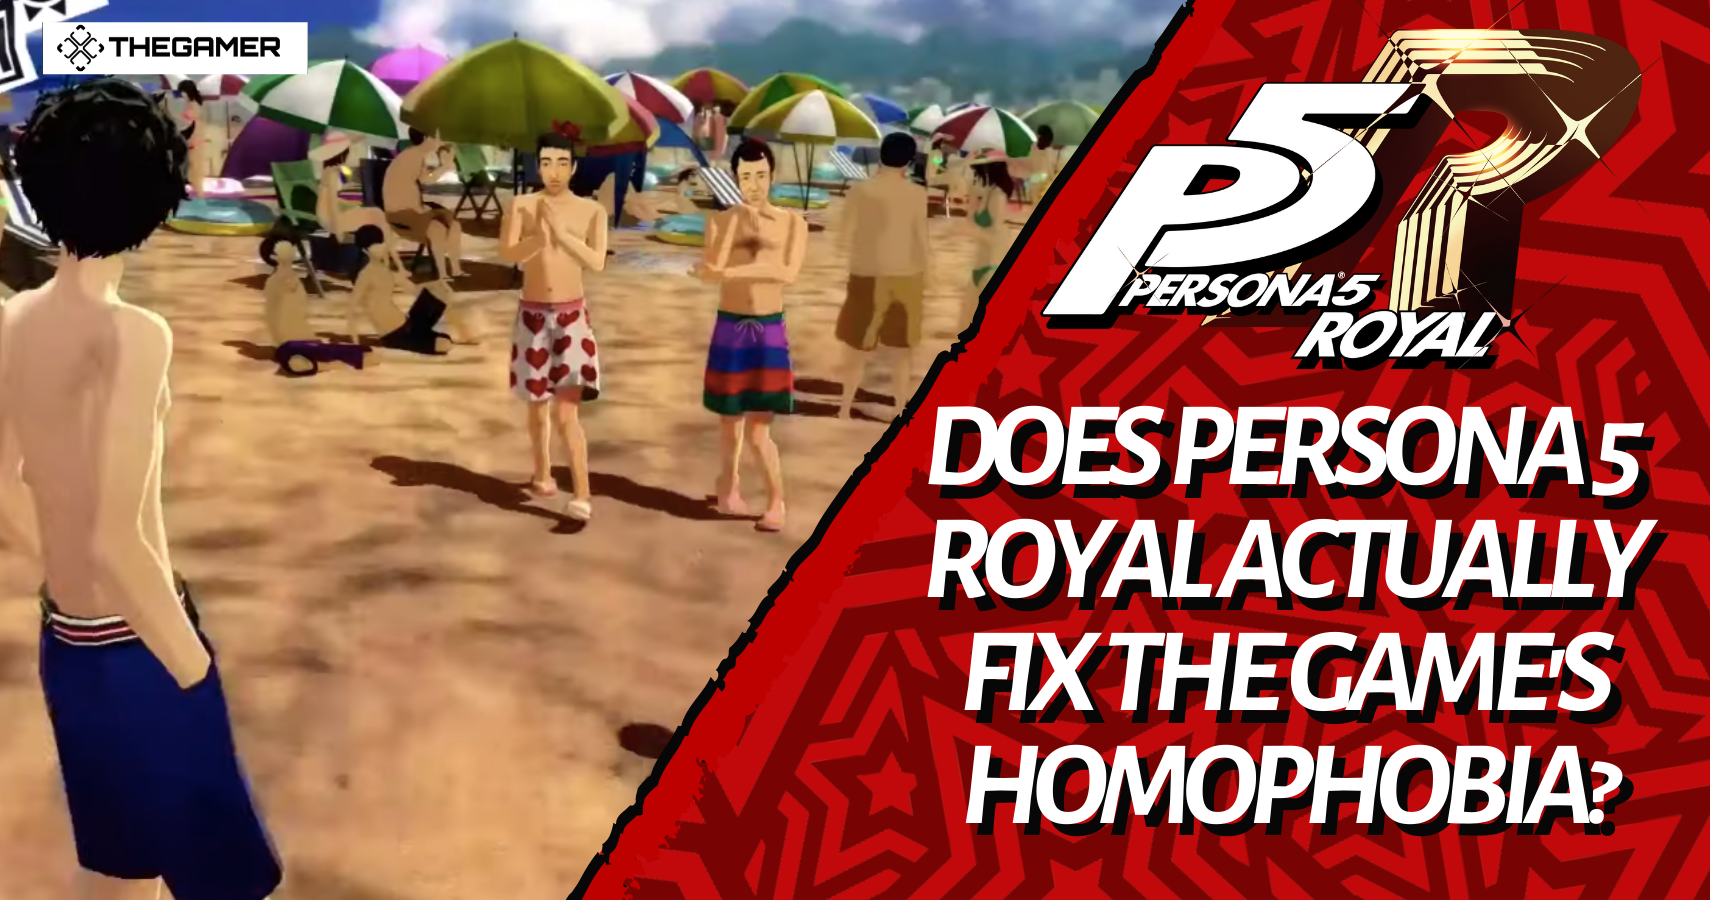 Persona 5 Tactica Tries To Make Up For The Series' Homophobia